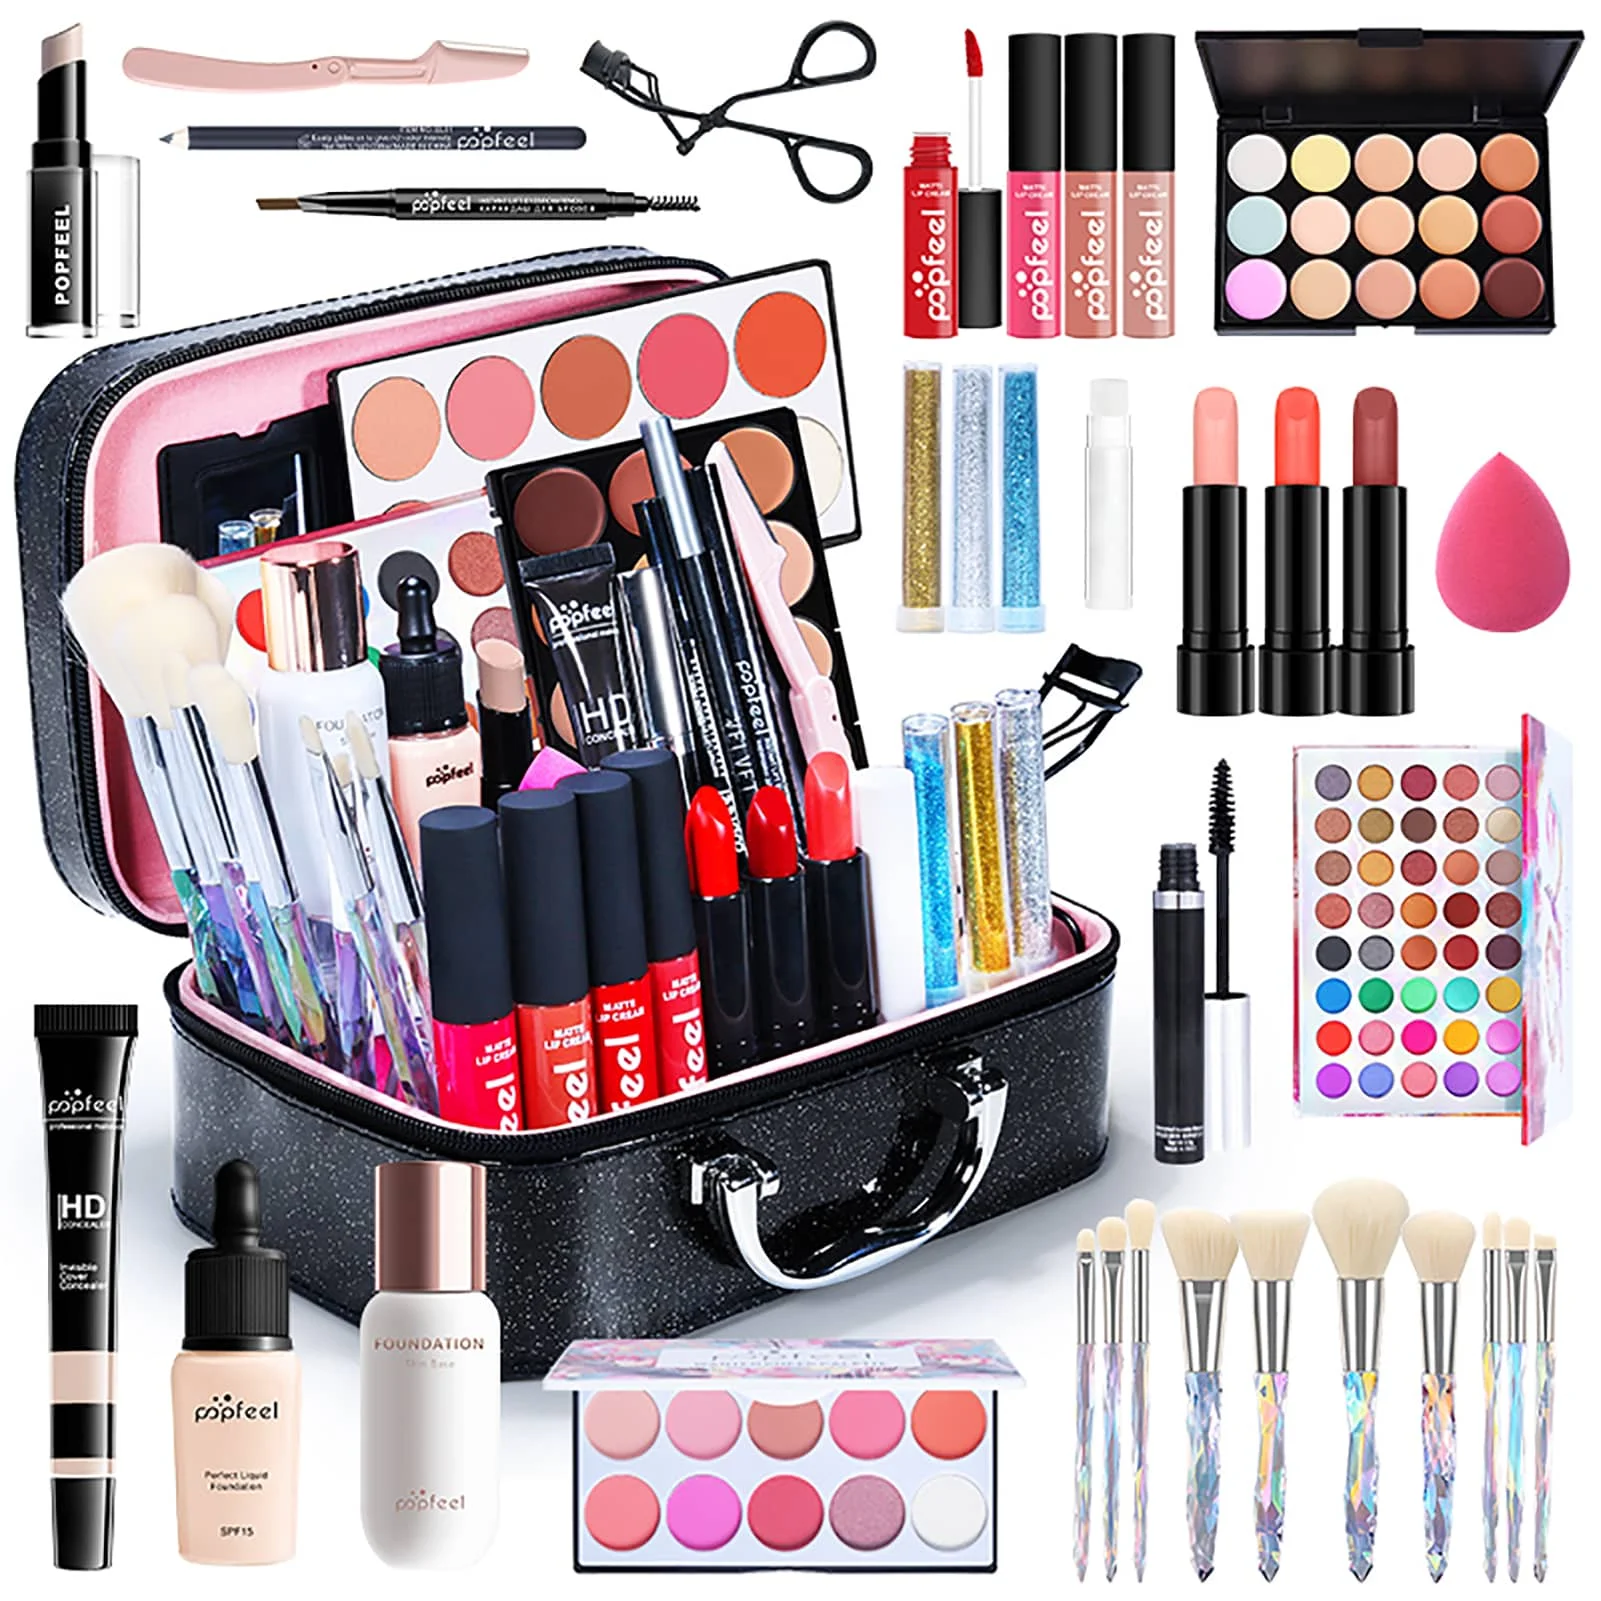 All In One Makeup Kit(Eyeshadow, LiGloss,Lipstick,Brushes,Eyebrow,Concealer)Beauty Cosmetic Bag Professional Travel Makeup Set